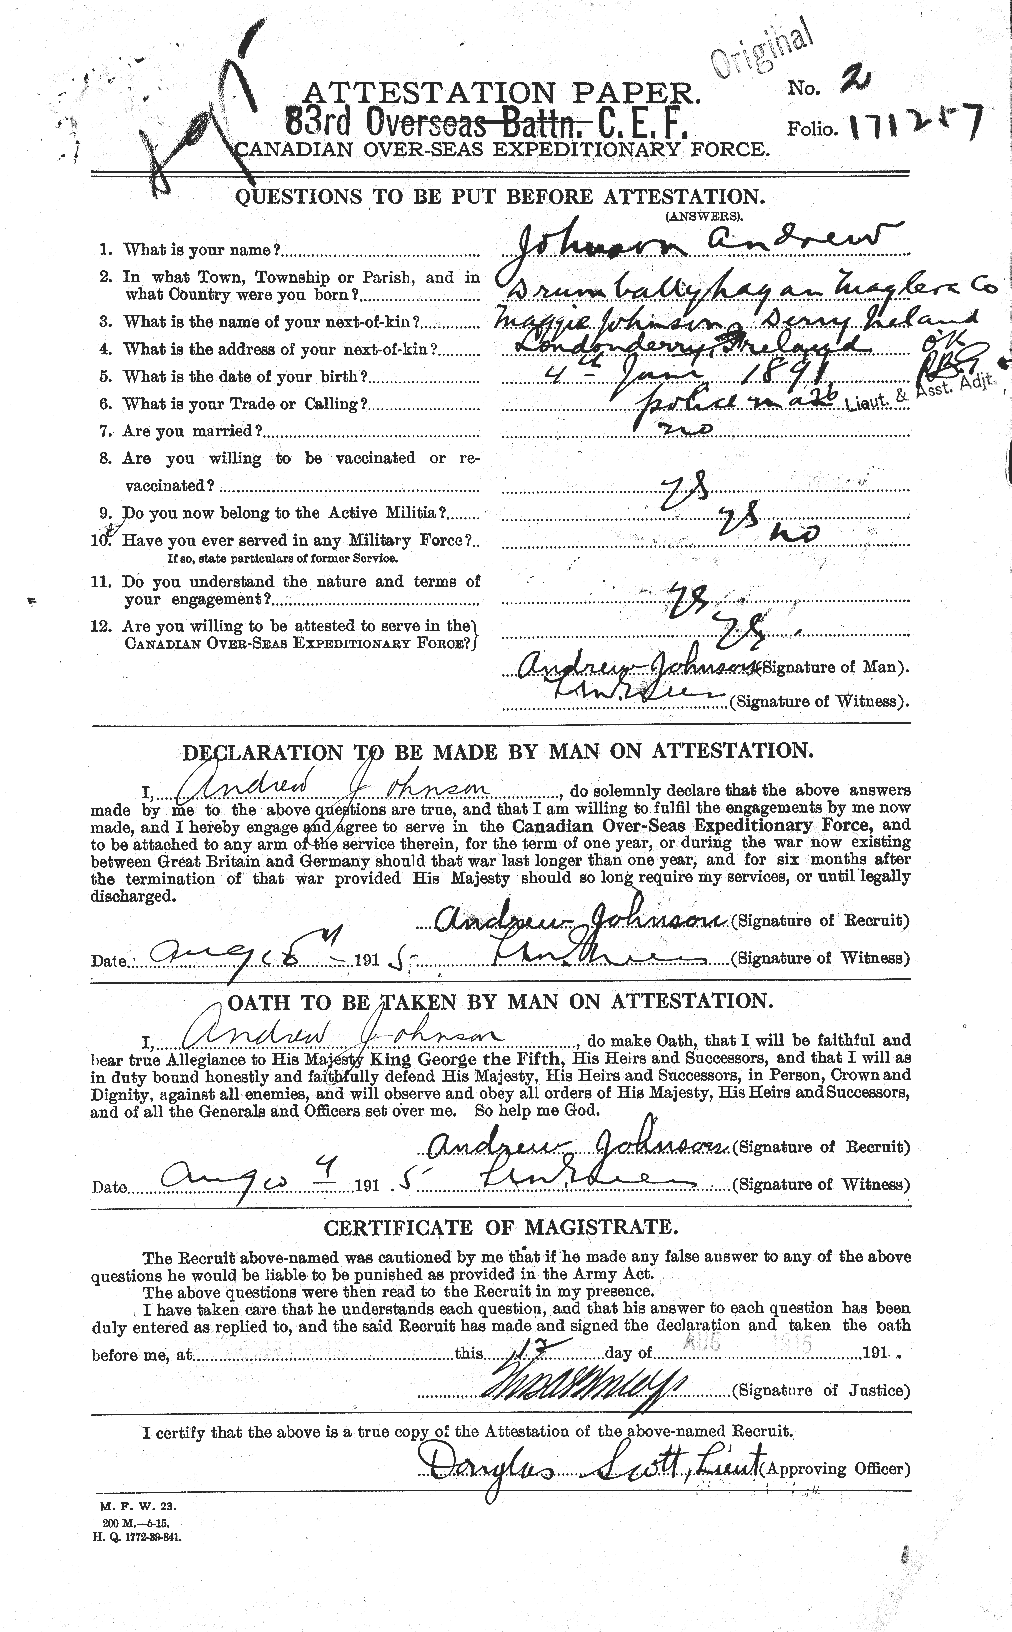 Personnel Records of the First World War - CEF 421210a